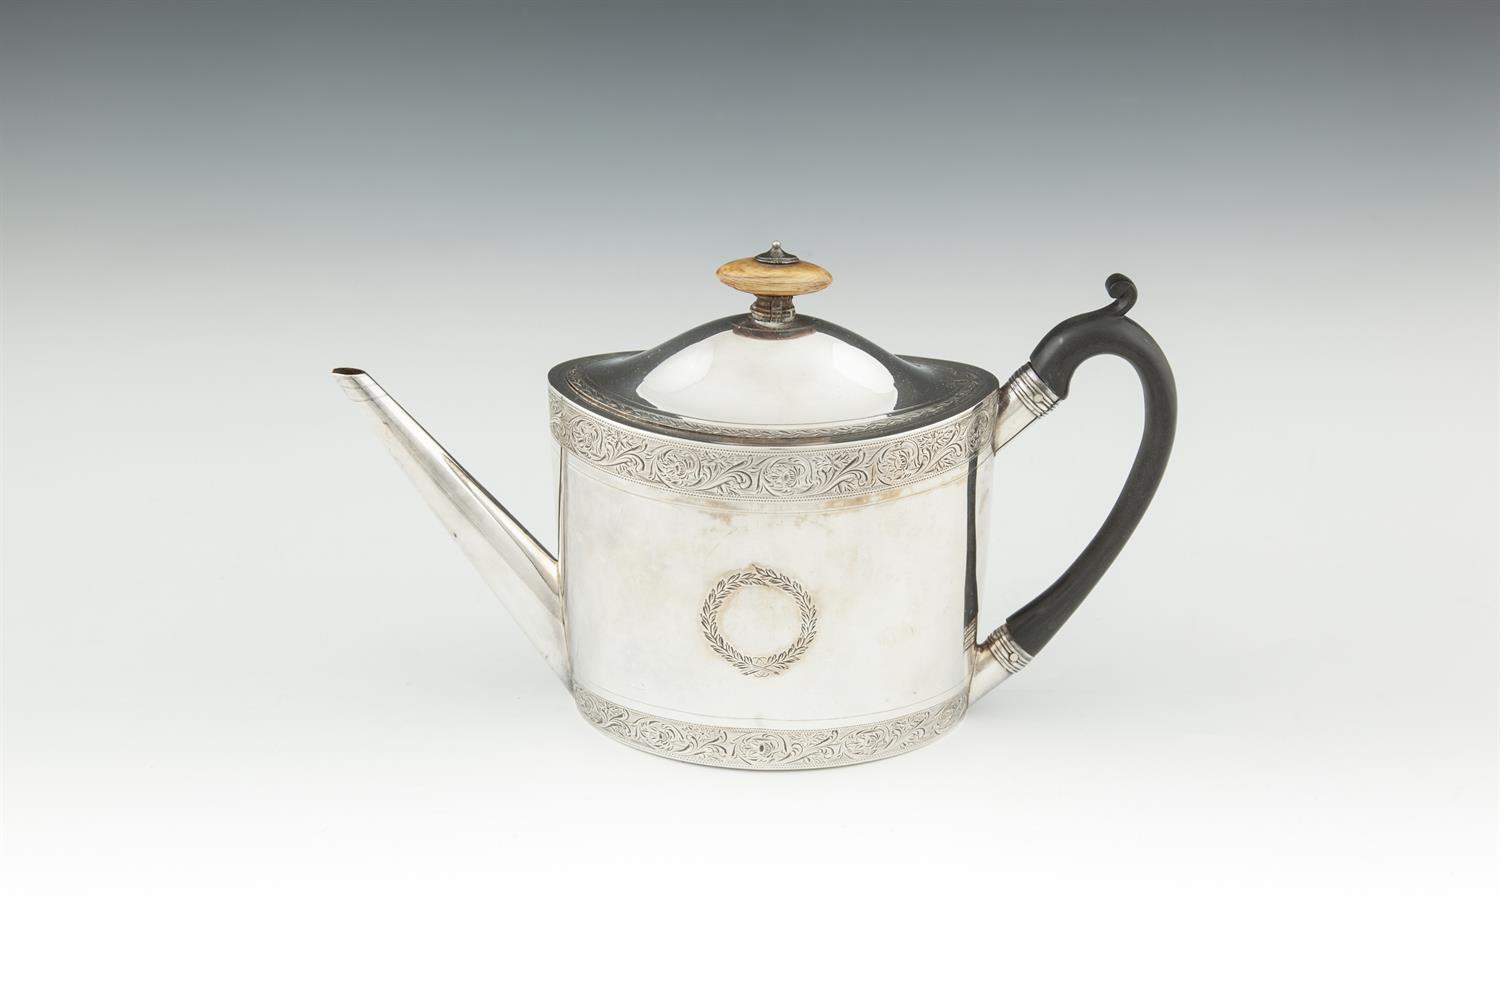 A GEORGE III OVAL SILVER TEAPOT, London 1794, mark of Henry Chawner, in the neo-classical taste, the